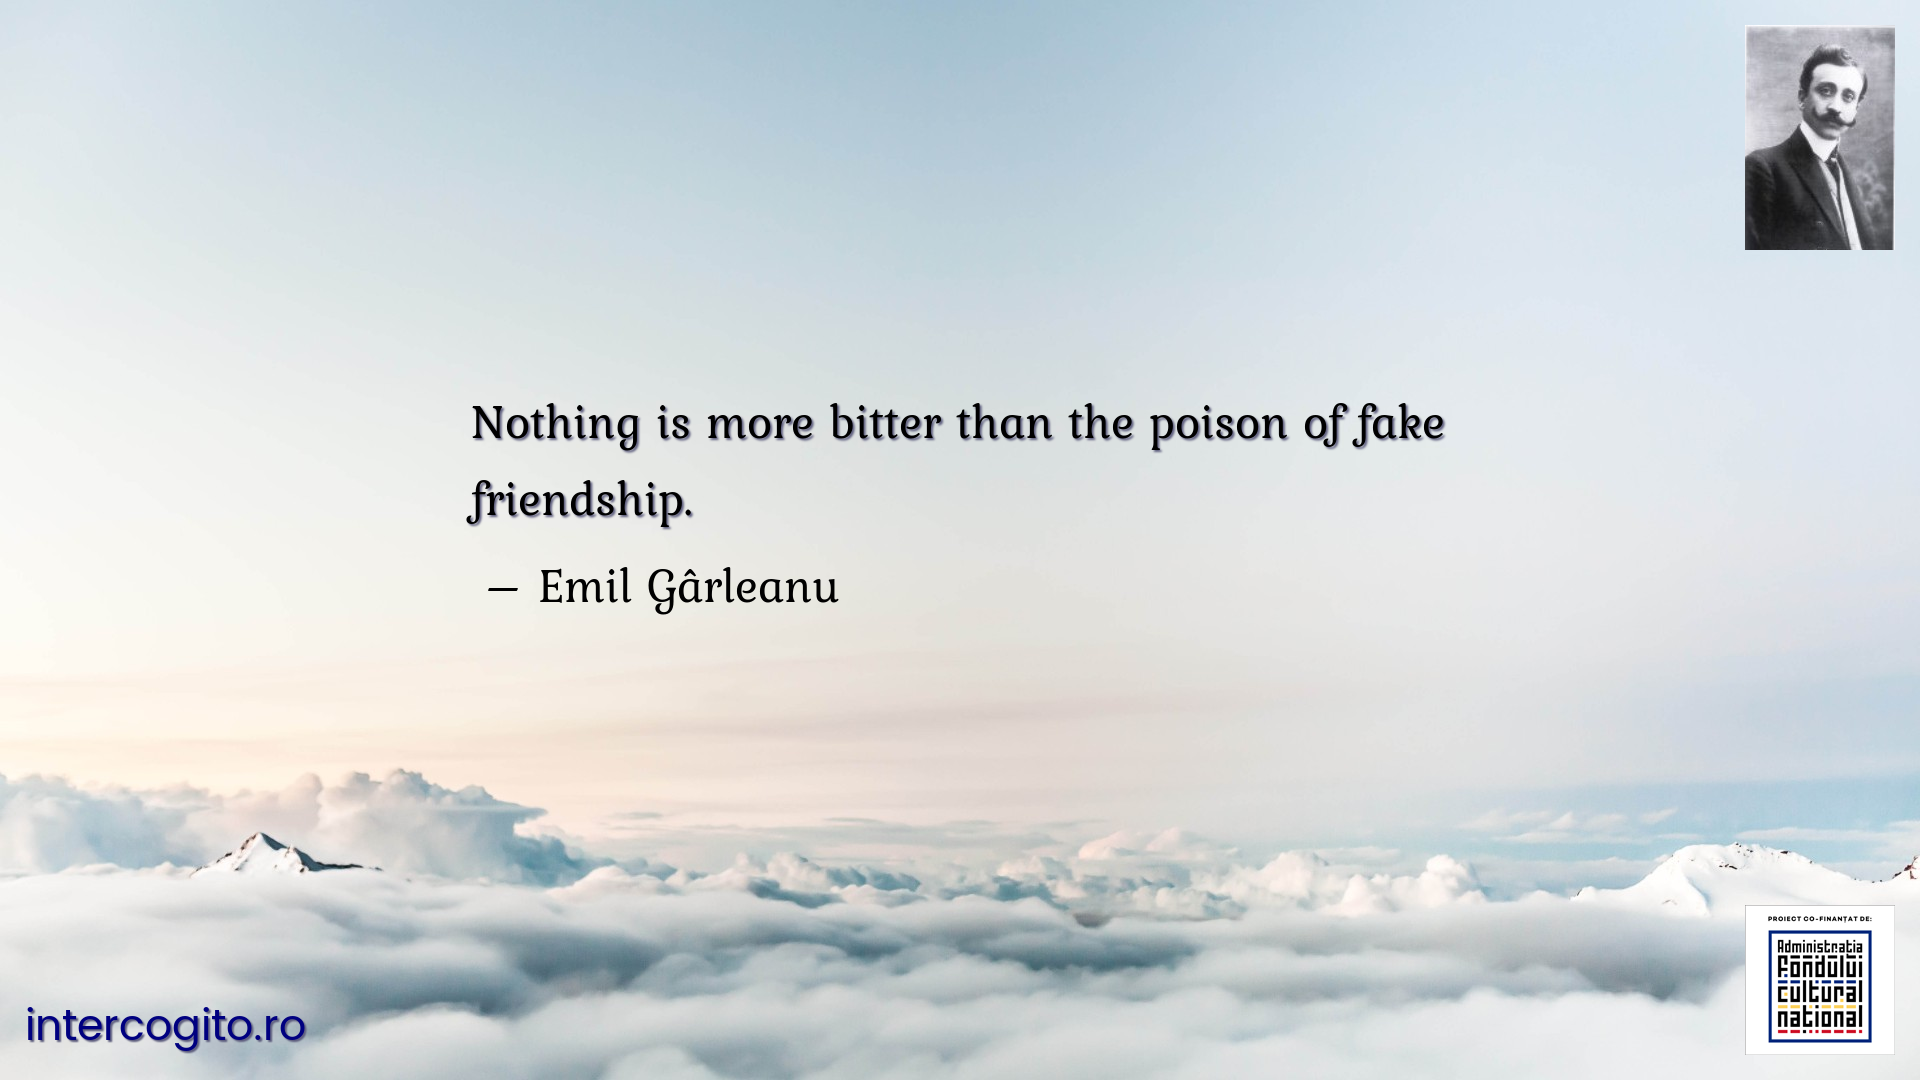 Nothing is more bitter than the poison of fake friendship.